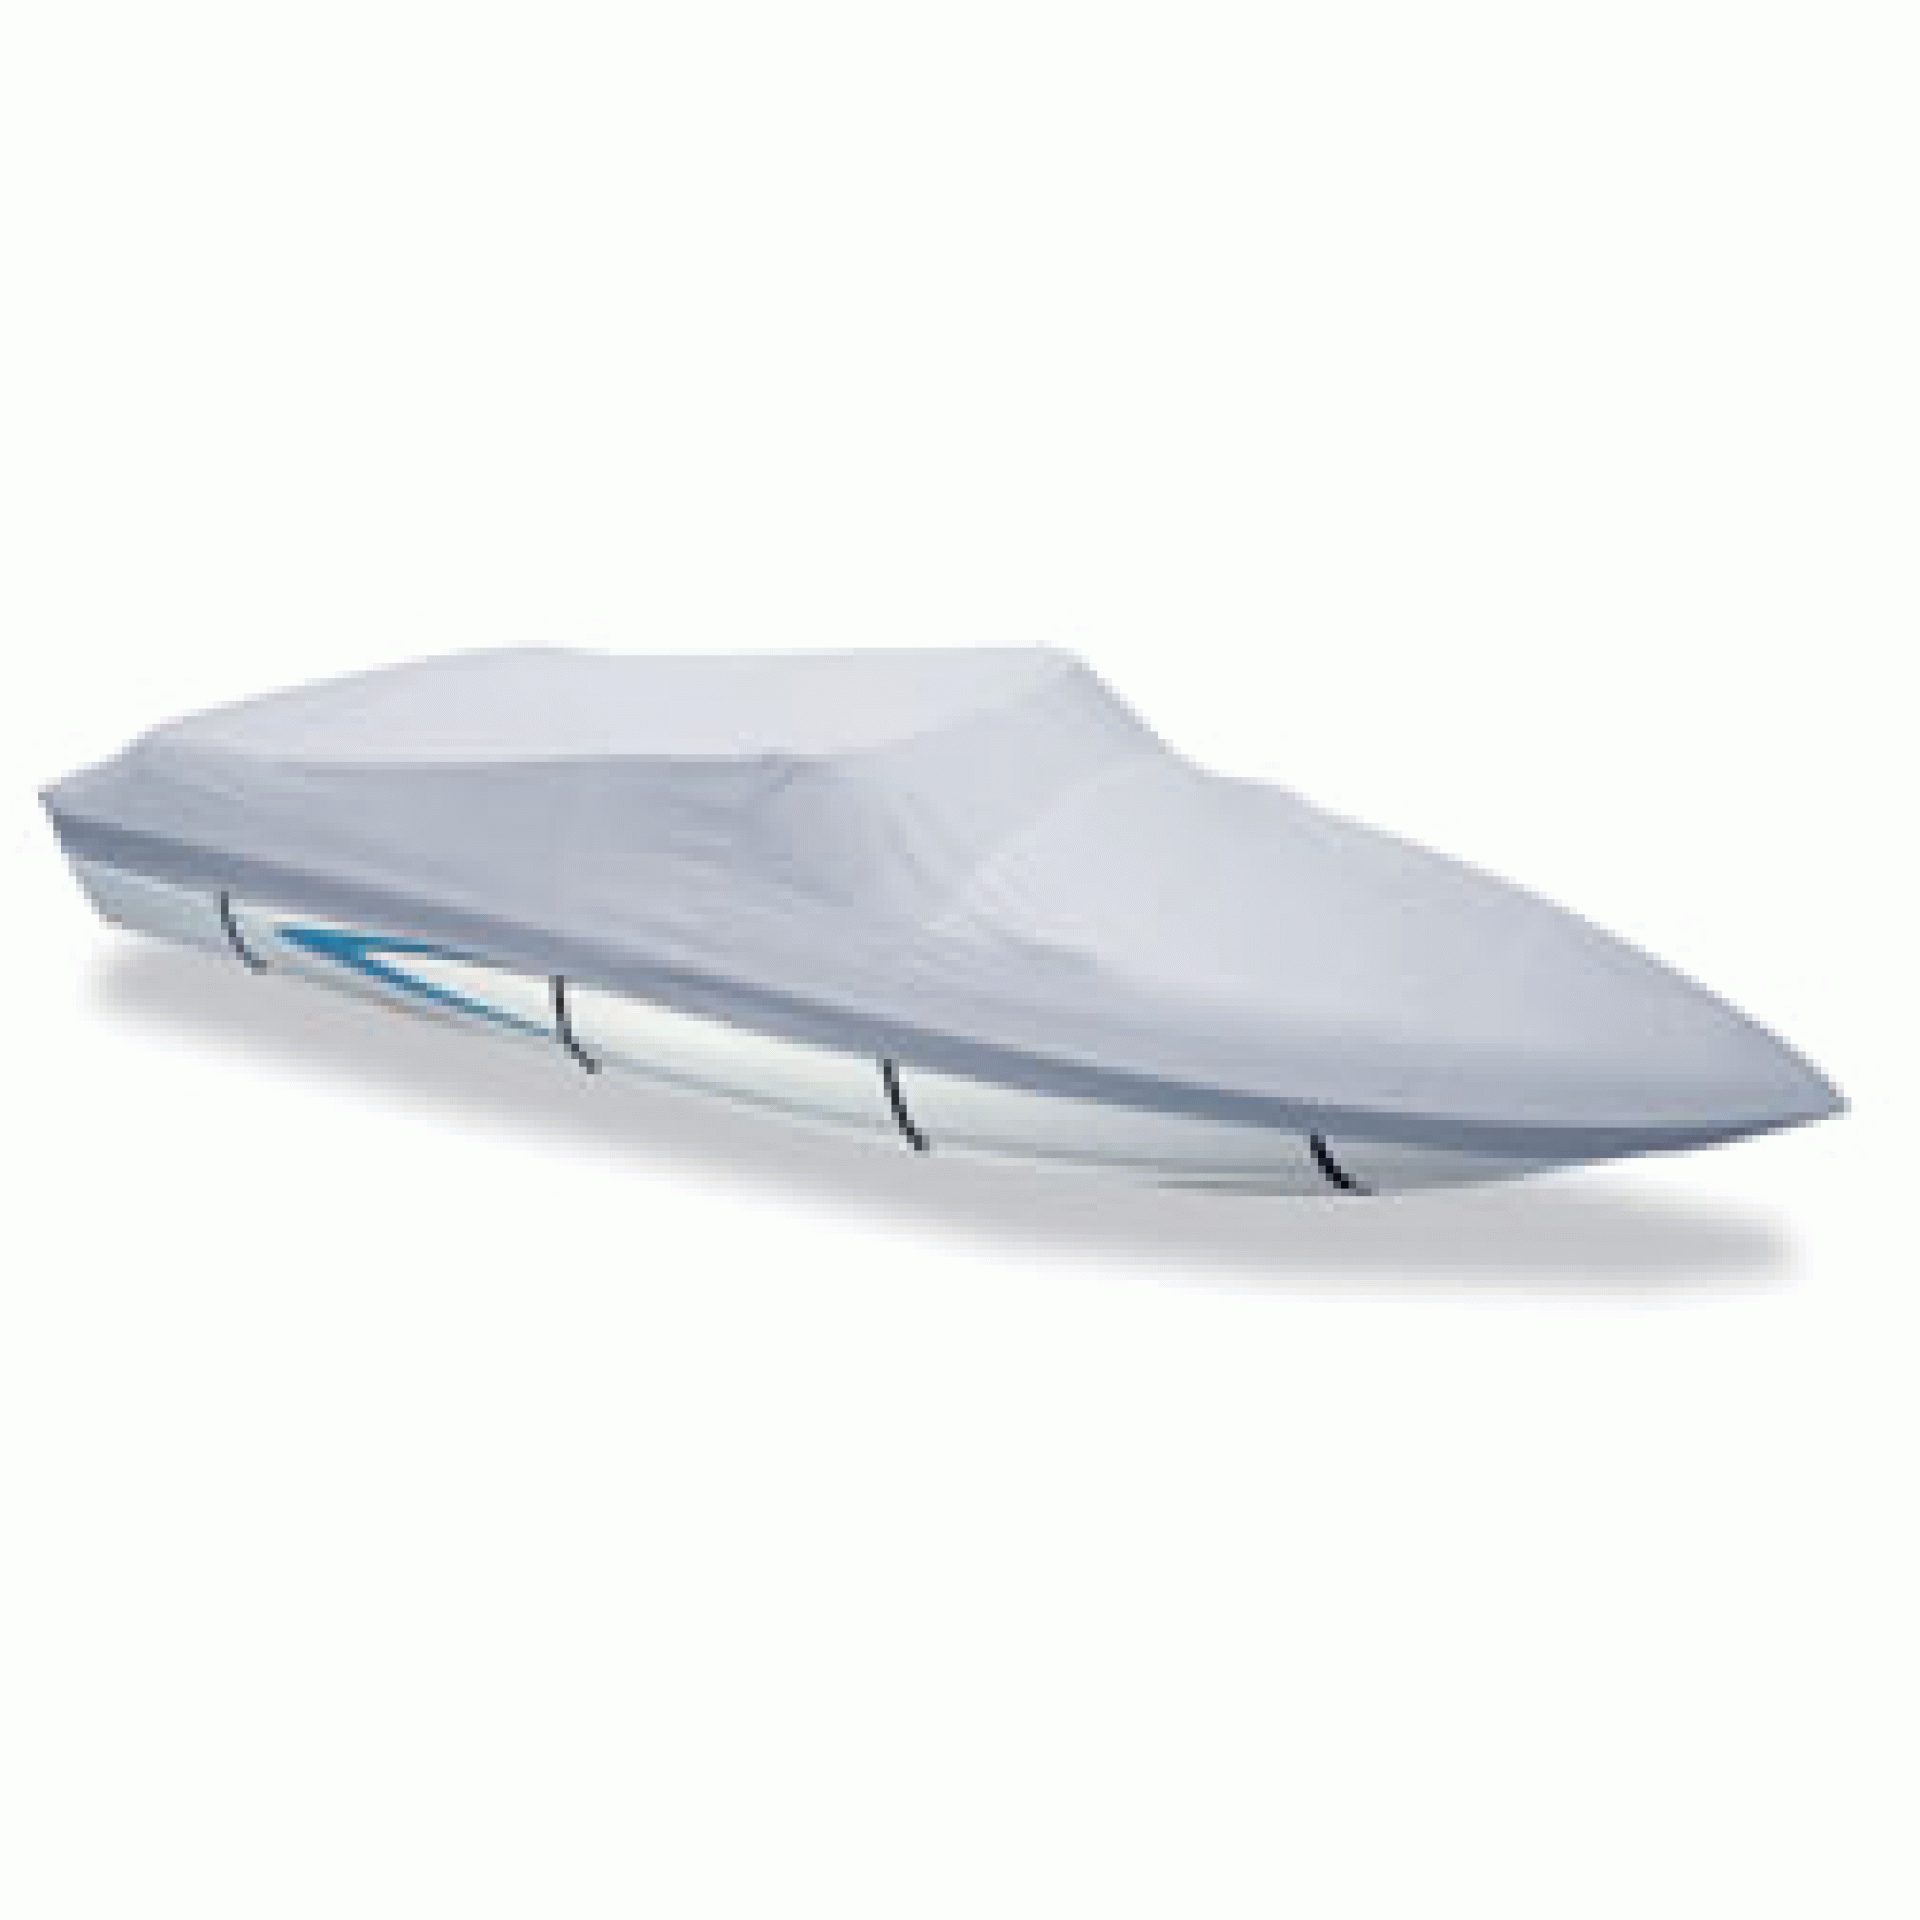 CARVER INDUSTRIES | 77018P-10 | BOAT COVER V HULL RUNABOUT O/B 18' 6" 96" BEAM POLY GUARD GRAY